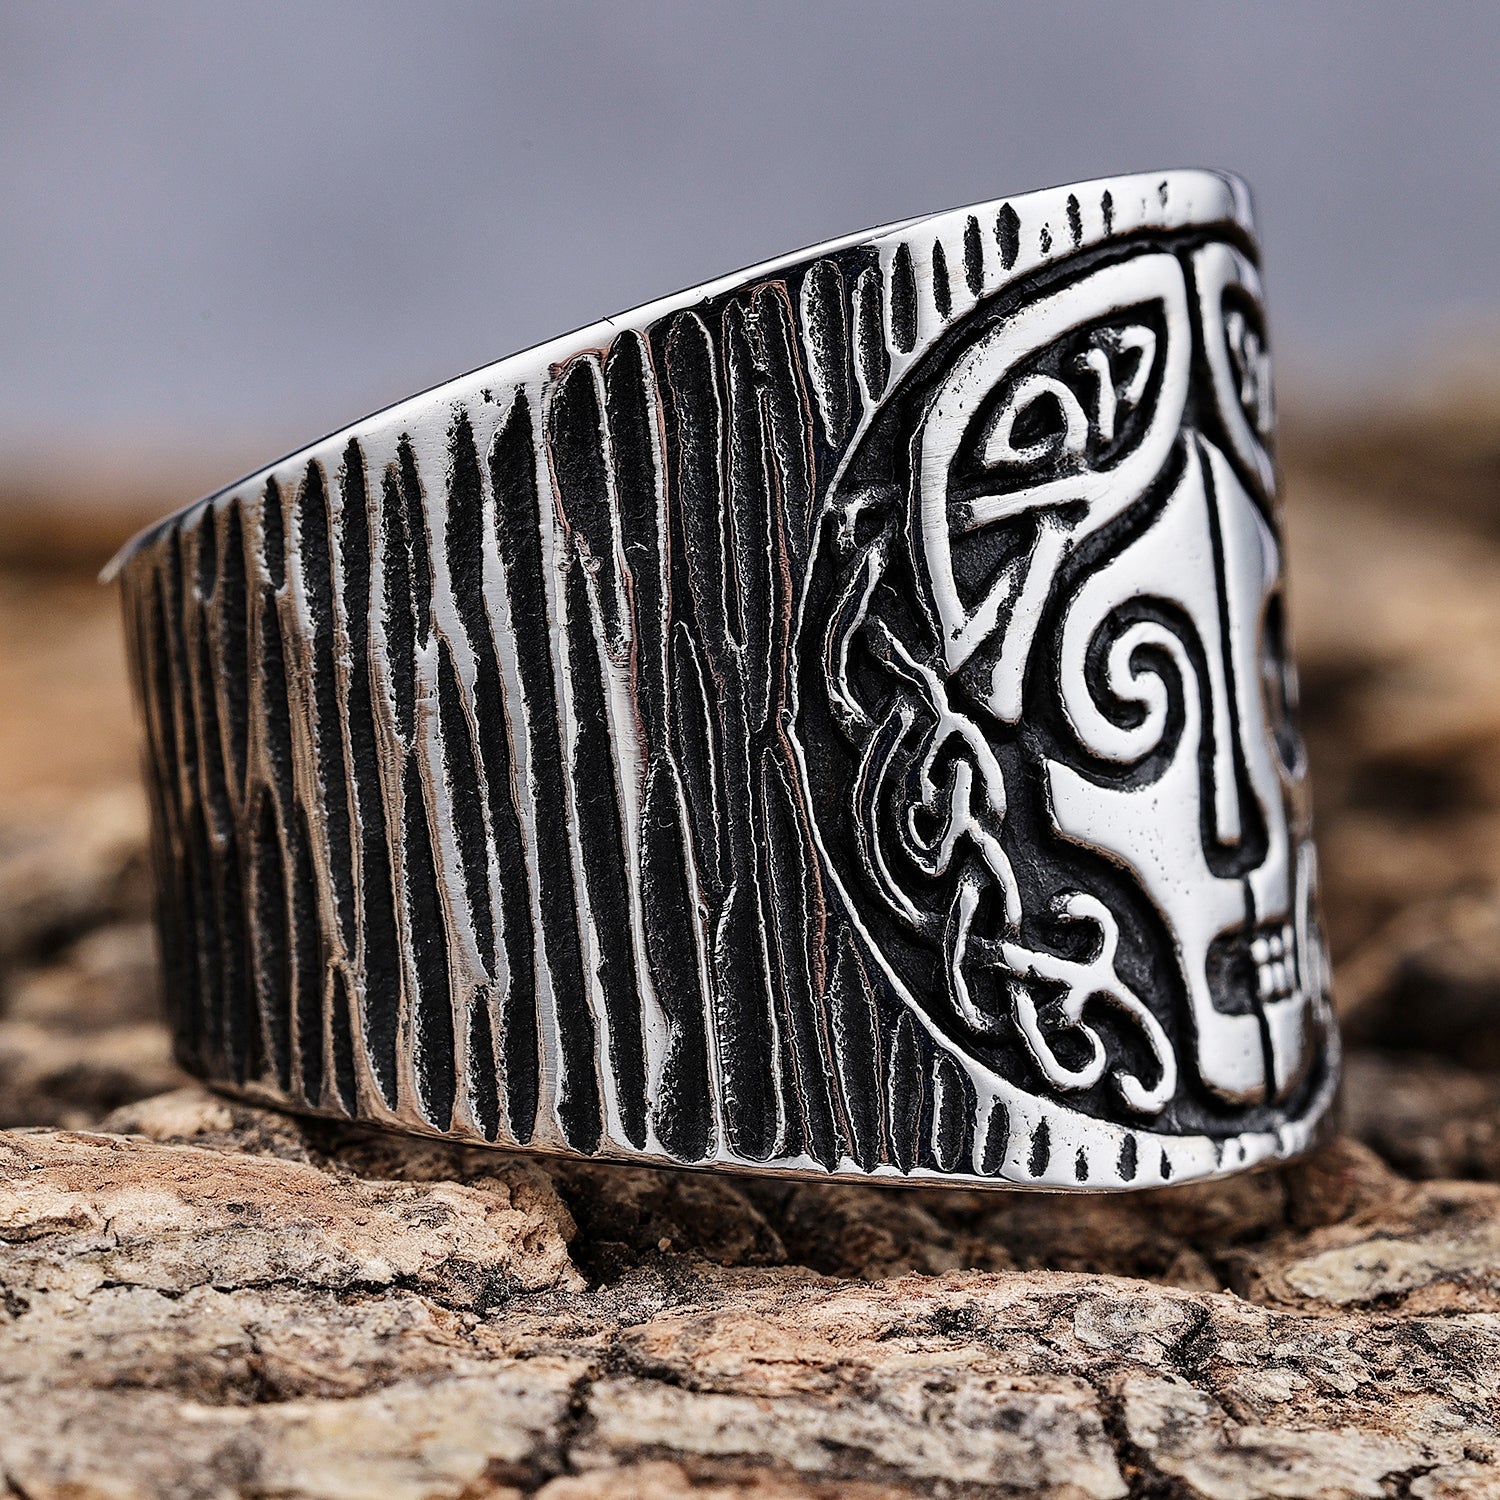 Two Sides of the Celtic Goddess Ring